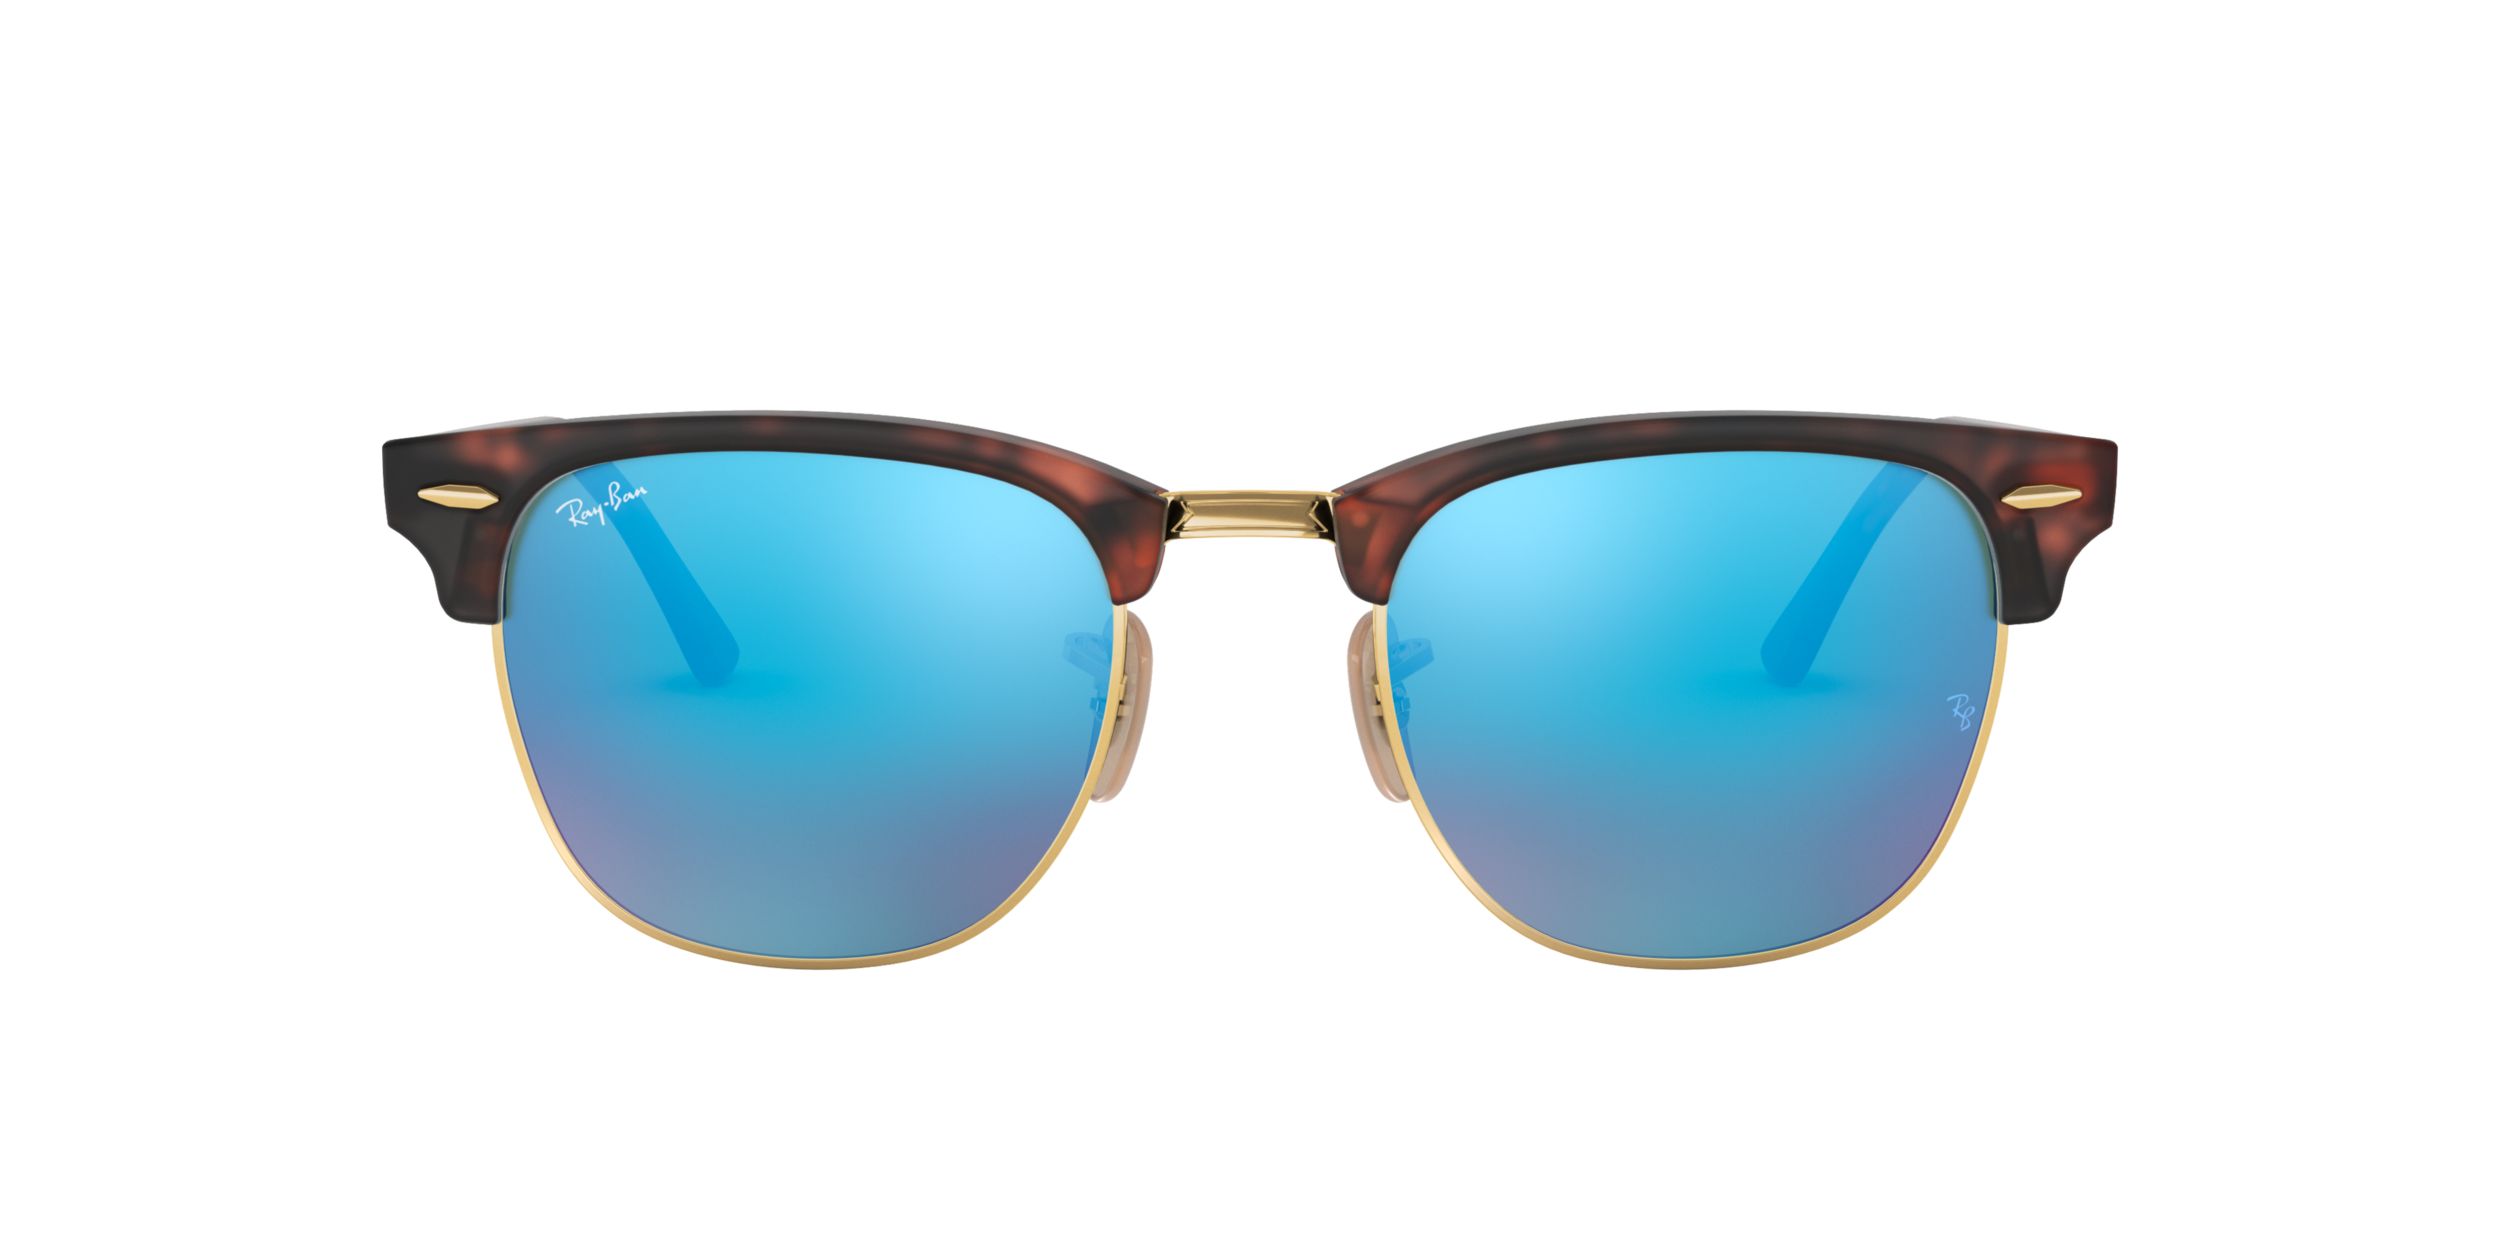 Image of Ray Ban Men's/Women's Clubmaster Browline Sunglasses Gradient